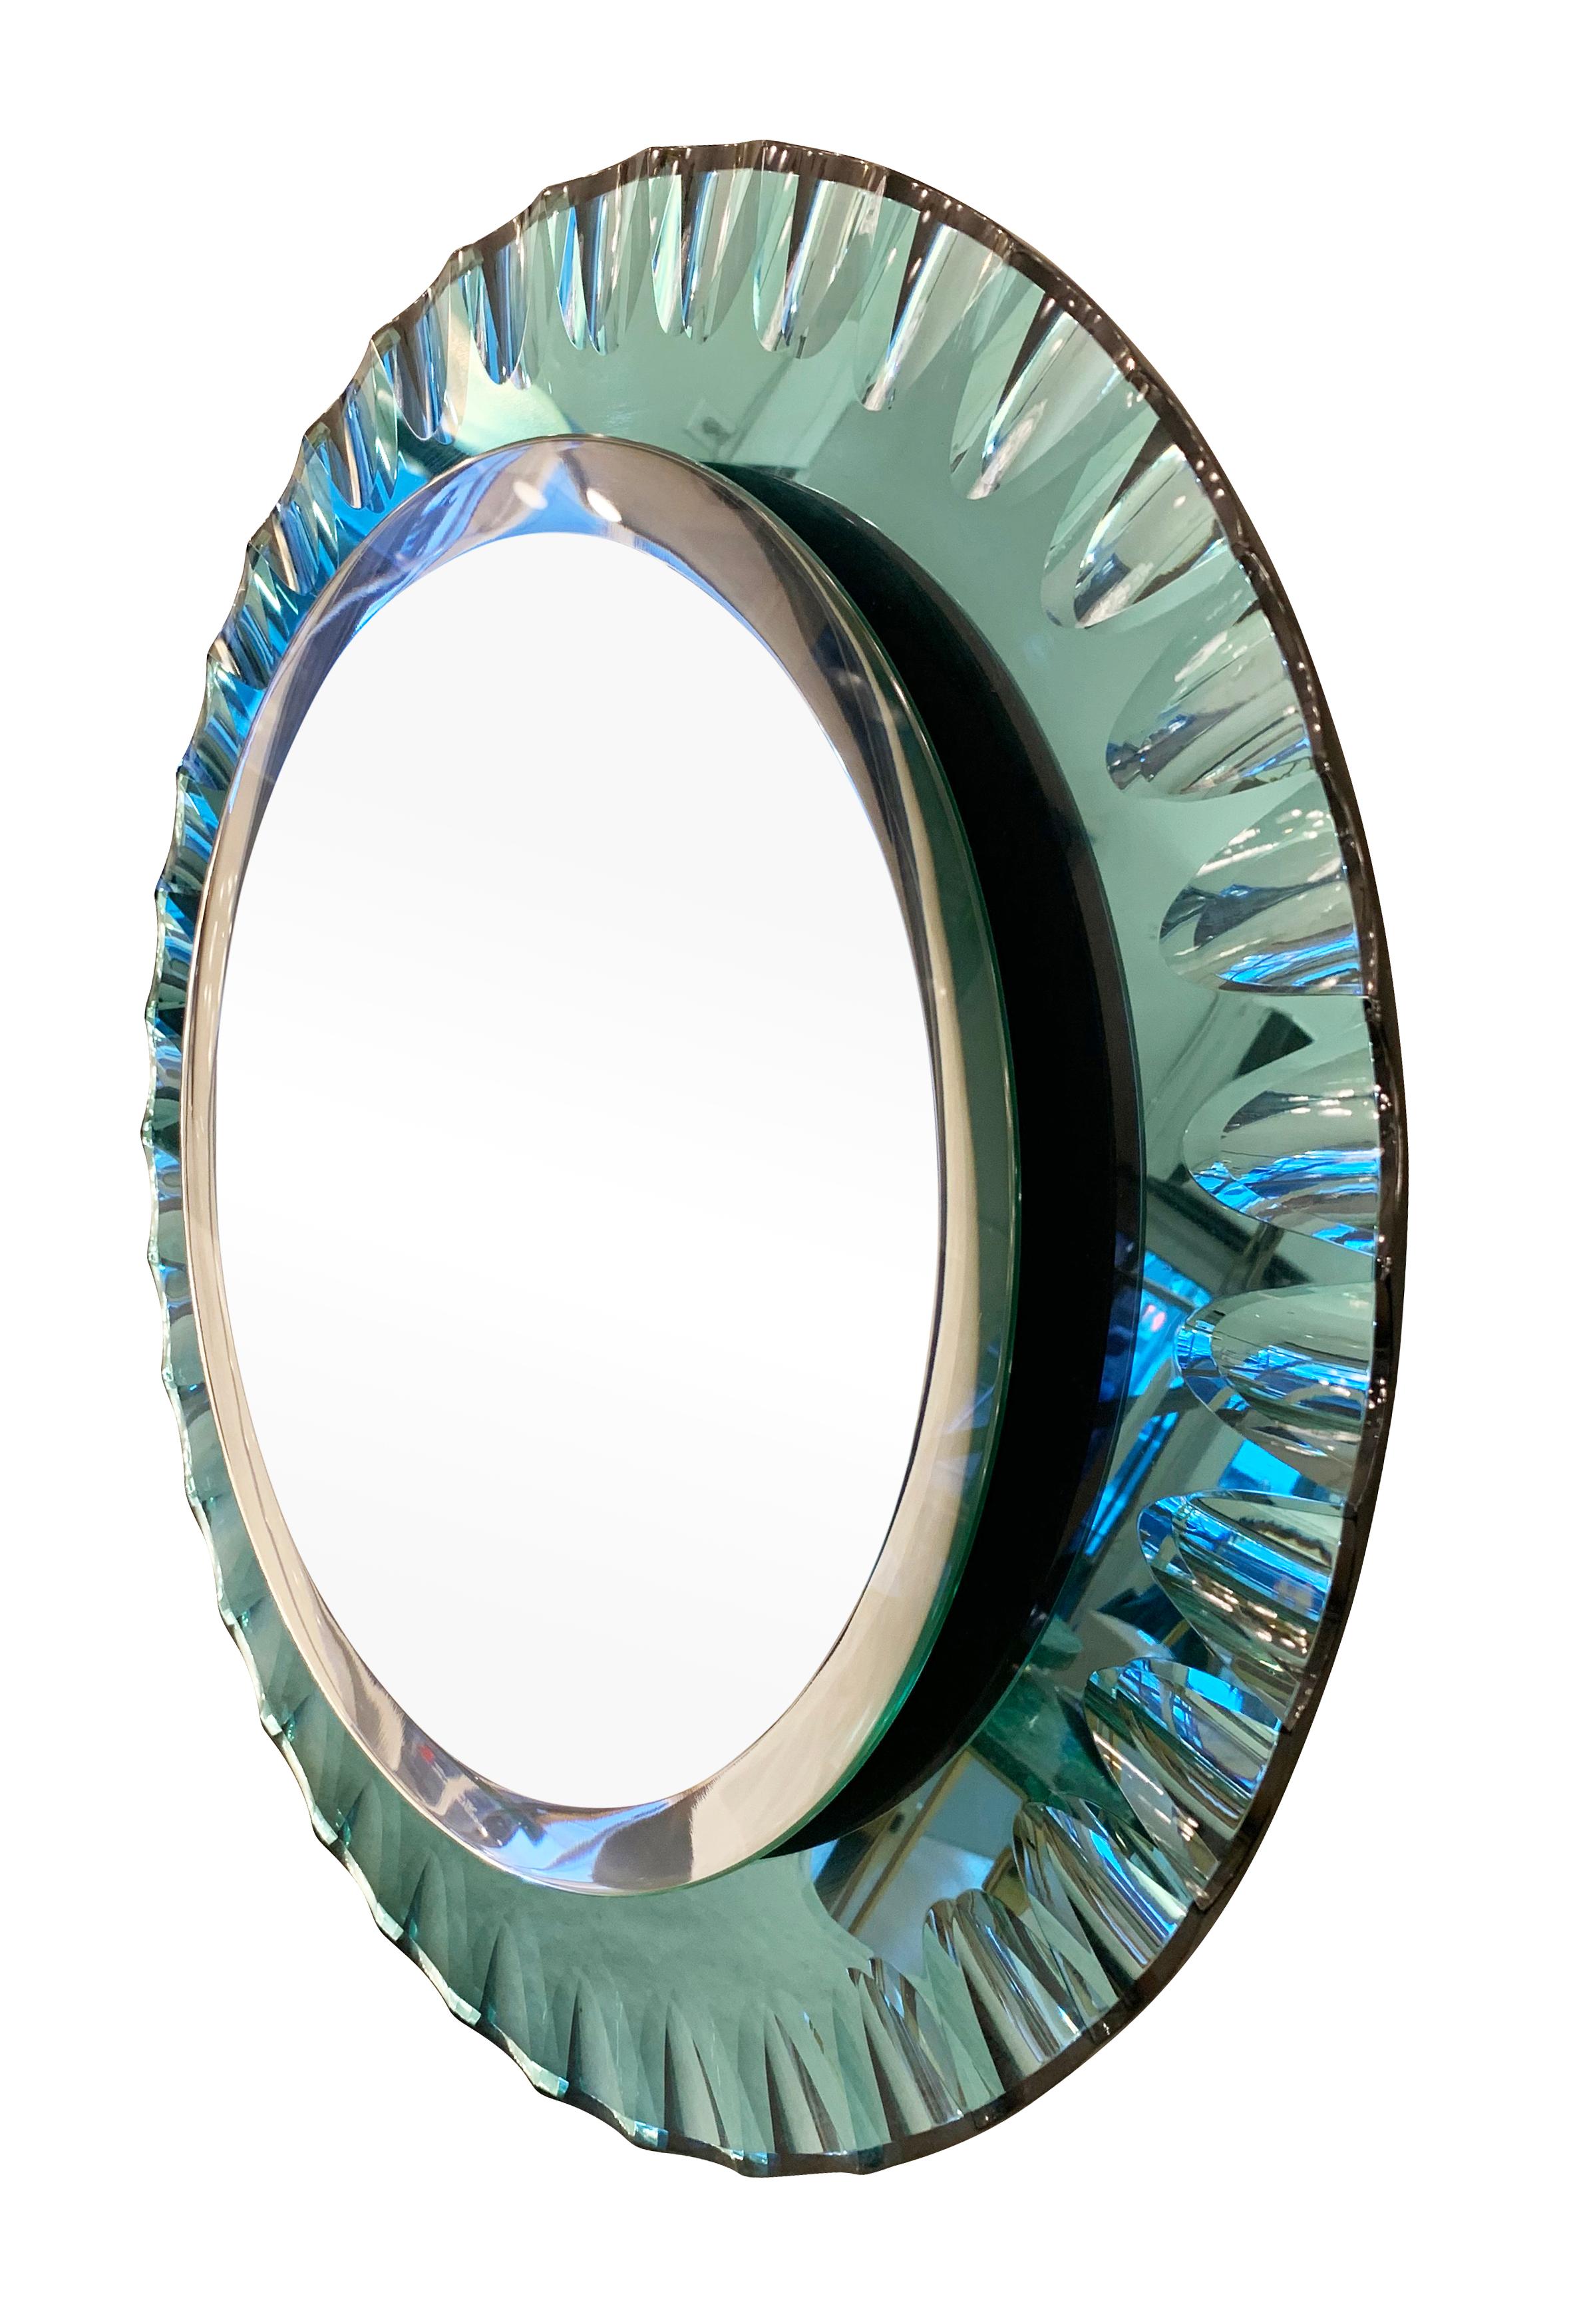 Italian midcentury mirror by Cristal Arte with a scalloped turquoise glass edge and a beveled canter.

Condition: Excellent vintage condition, minor wear and age spots consistent with age and use.

Diameter: 27.5”.


